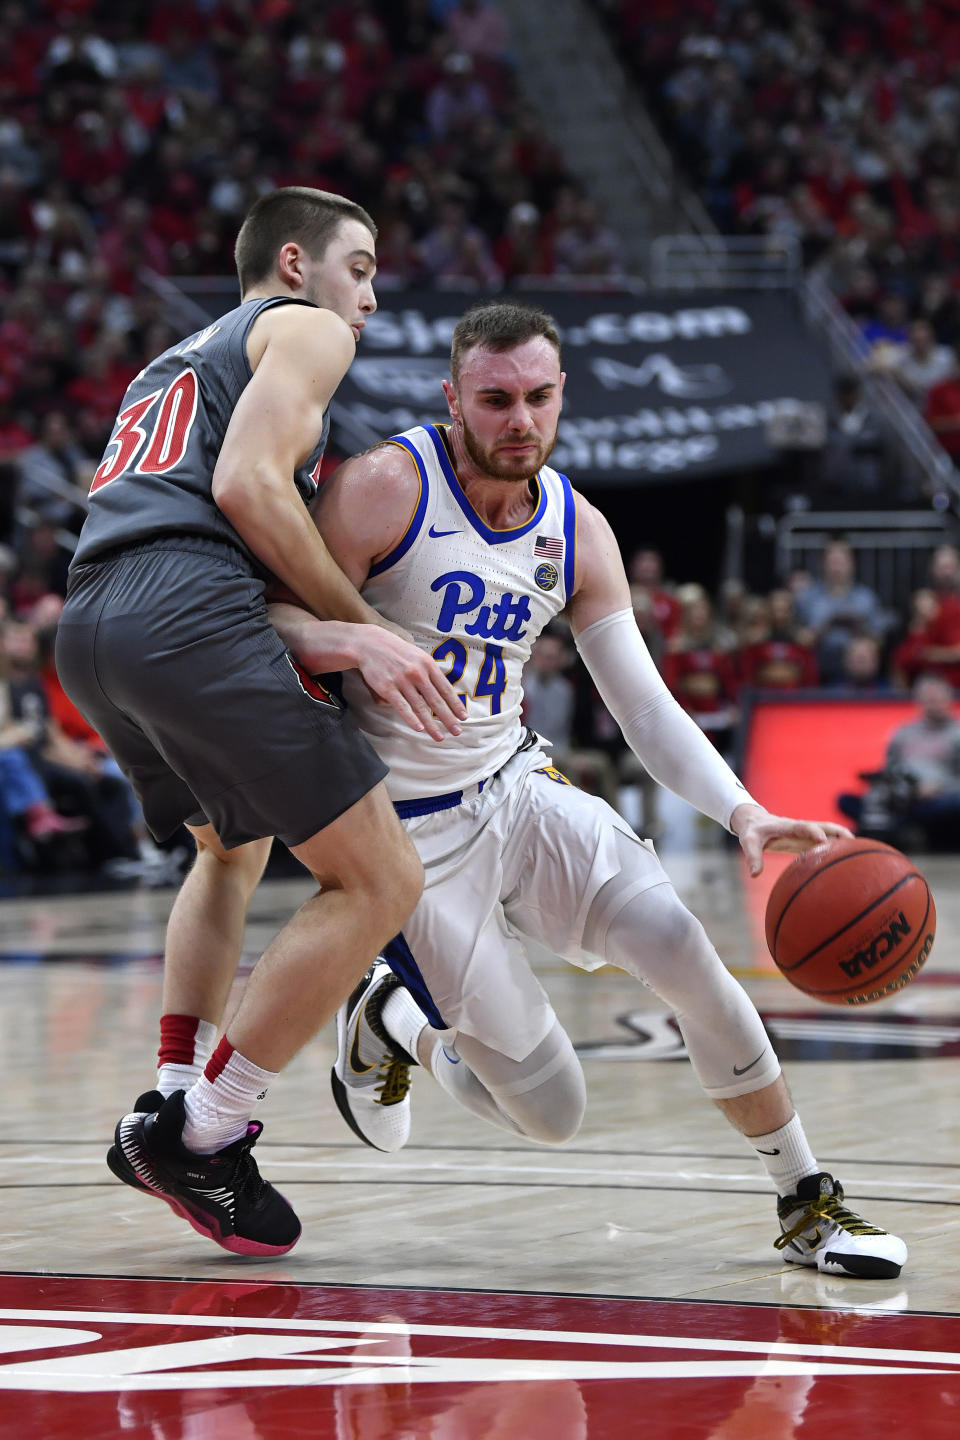 Pittsburgh guard Ryan Murphy (24) fights to get around the defense of Louisville guard Ryan McMahon (30) during the first half of an NCAA college basketball game in Louisville, Ky., Friday, Dec. 6, 2019. (AP Photo/Timothy D. Easley)